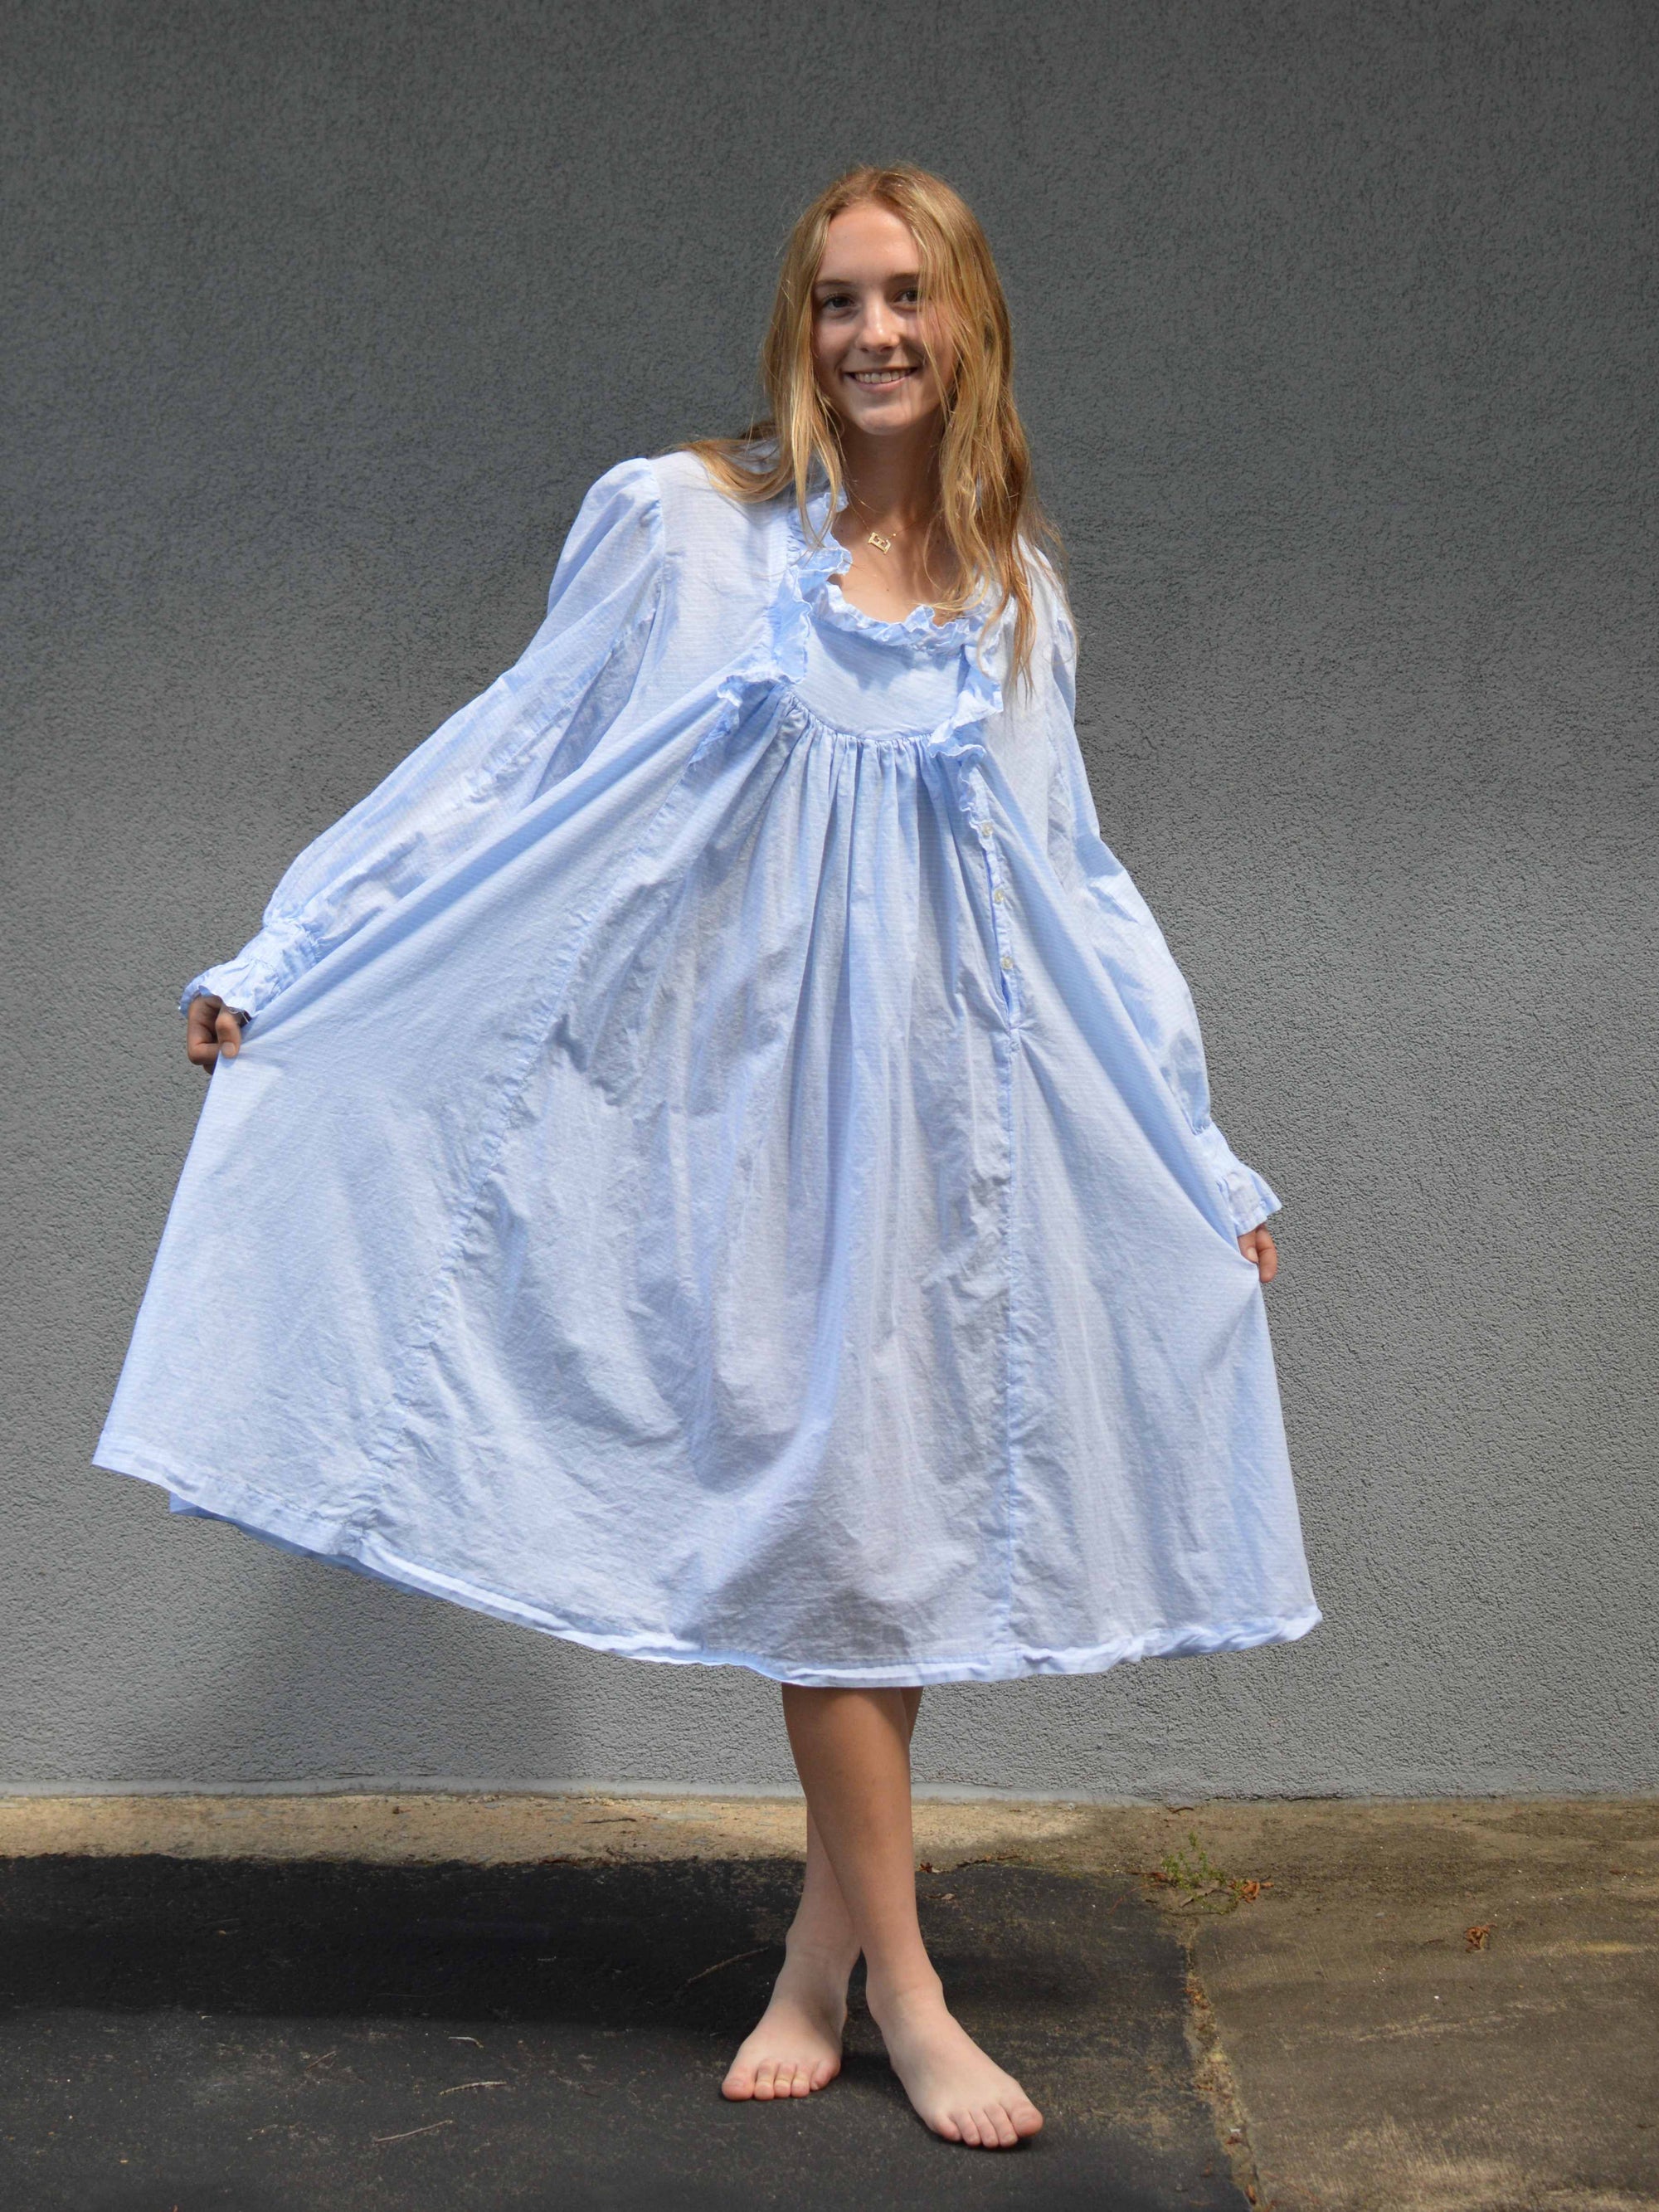 Young woman standing in front of a grey wall in a light blue ruffled nightgown.